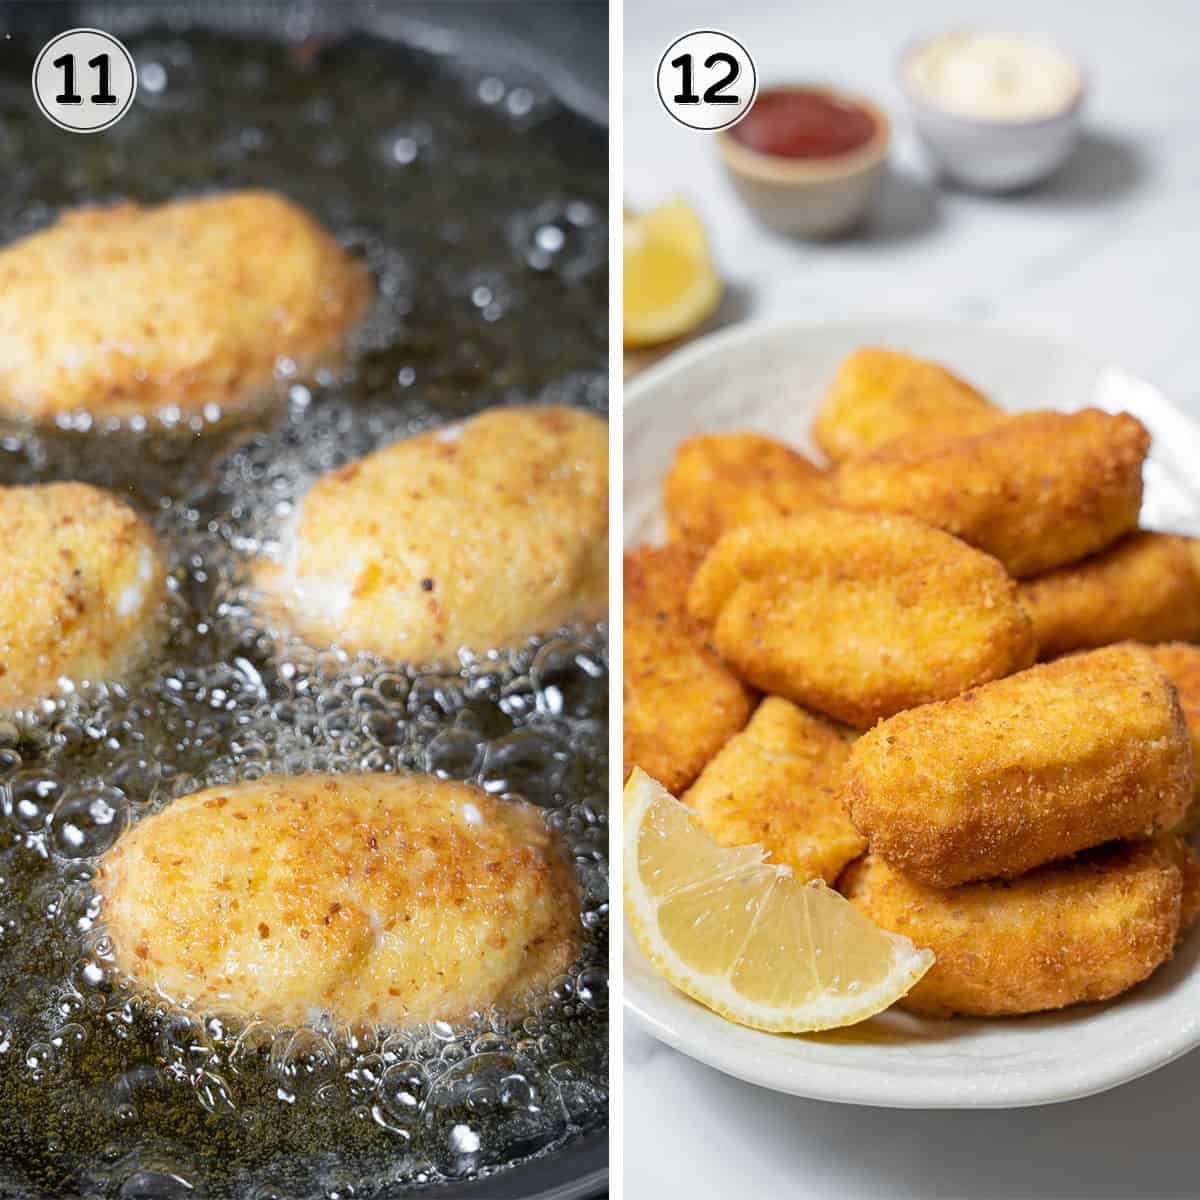 frying the cod croquettes in oil and serving with a lemon wedge.